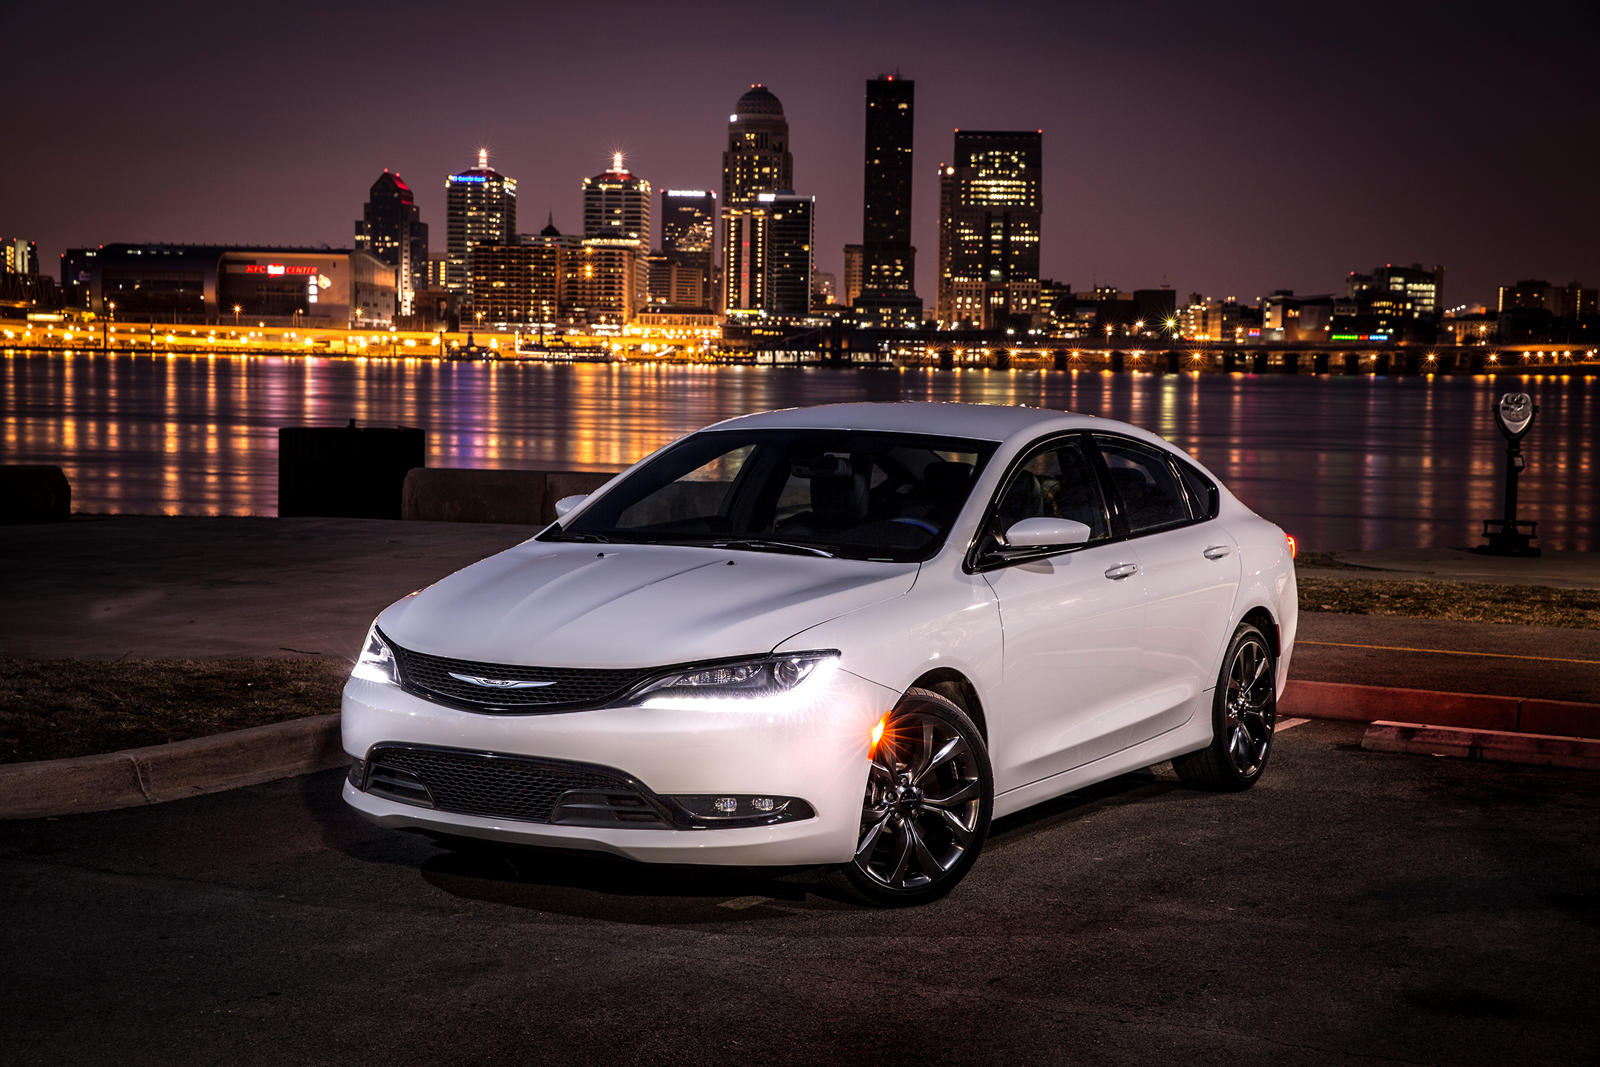 2016 Chrysler 200 Sedan: Review, Trims, Specs, Price, New Interior  Features, Exterior Design, and Specifications | CarBuzz